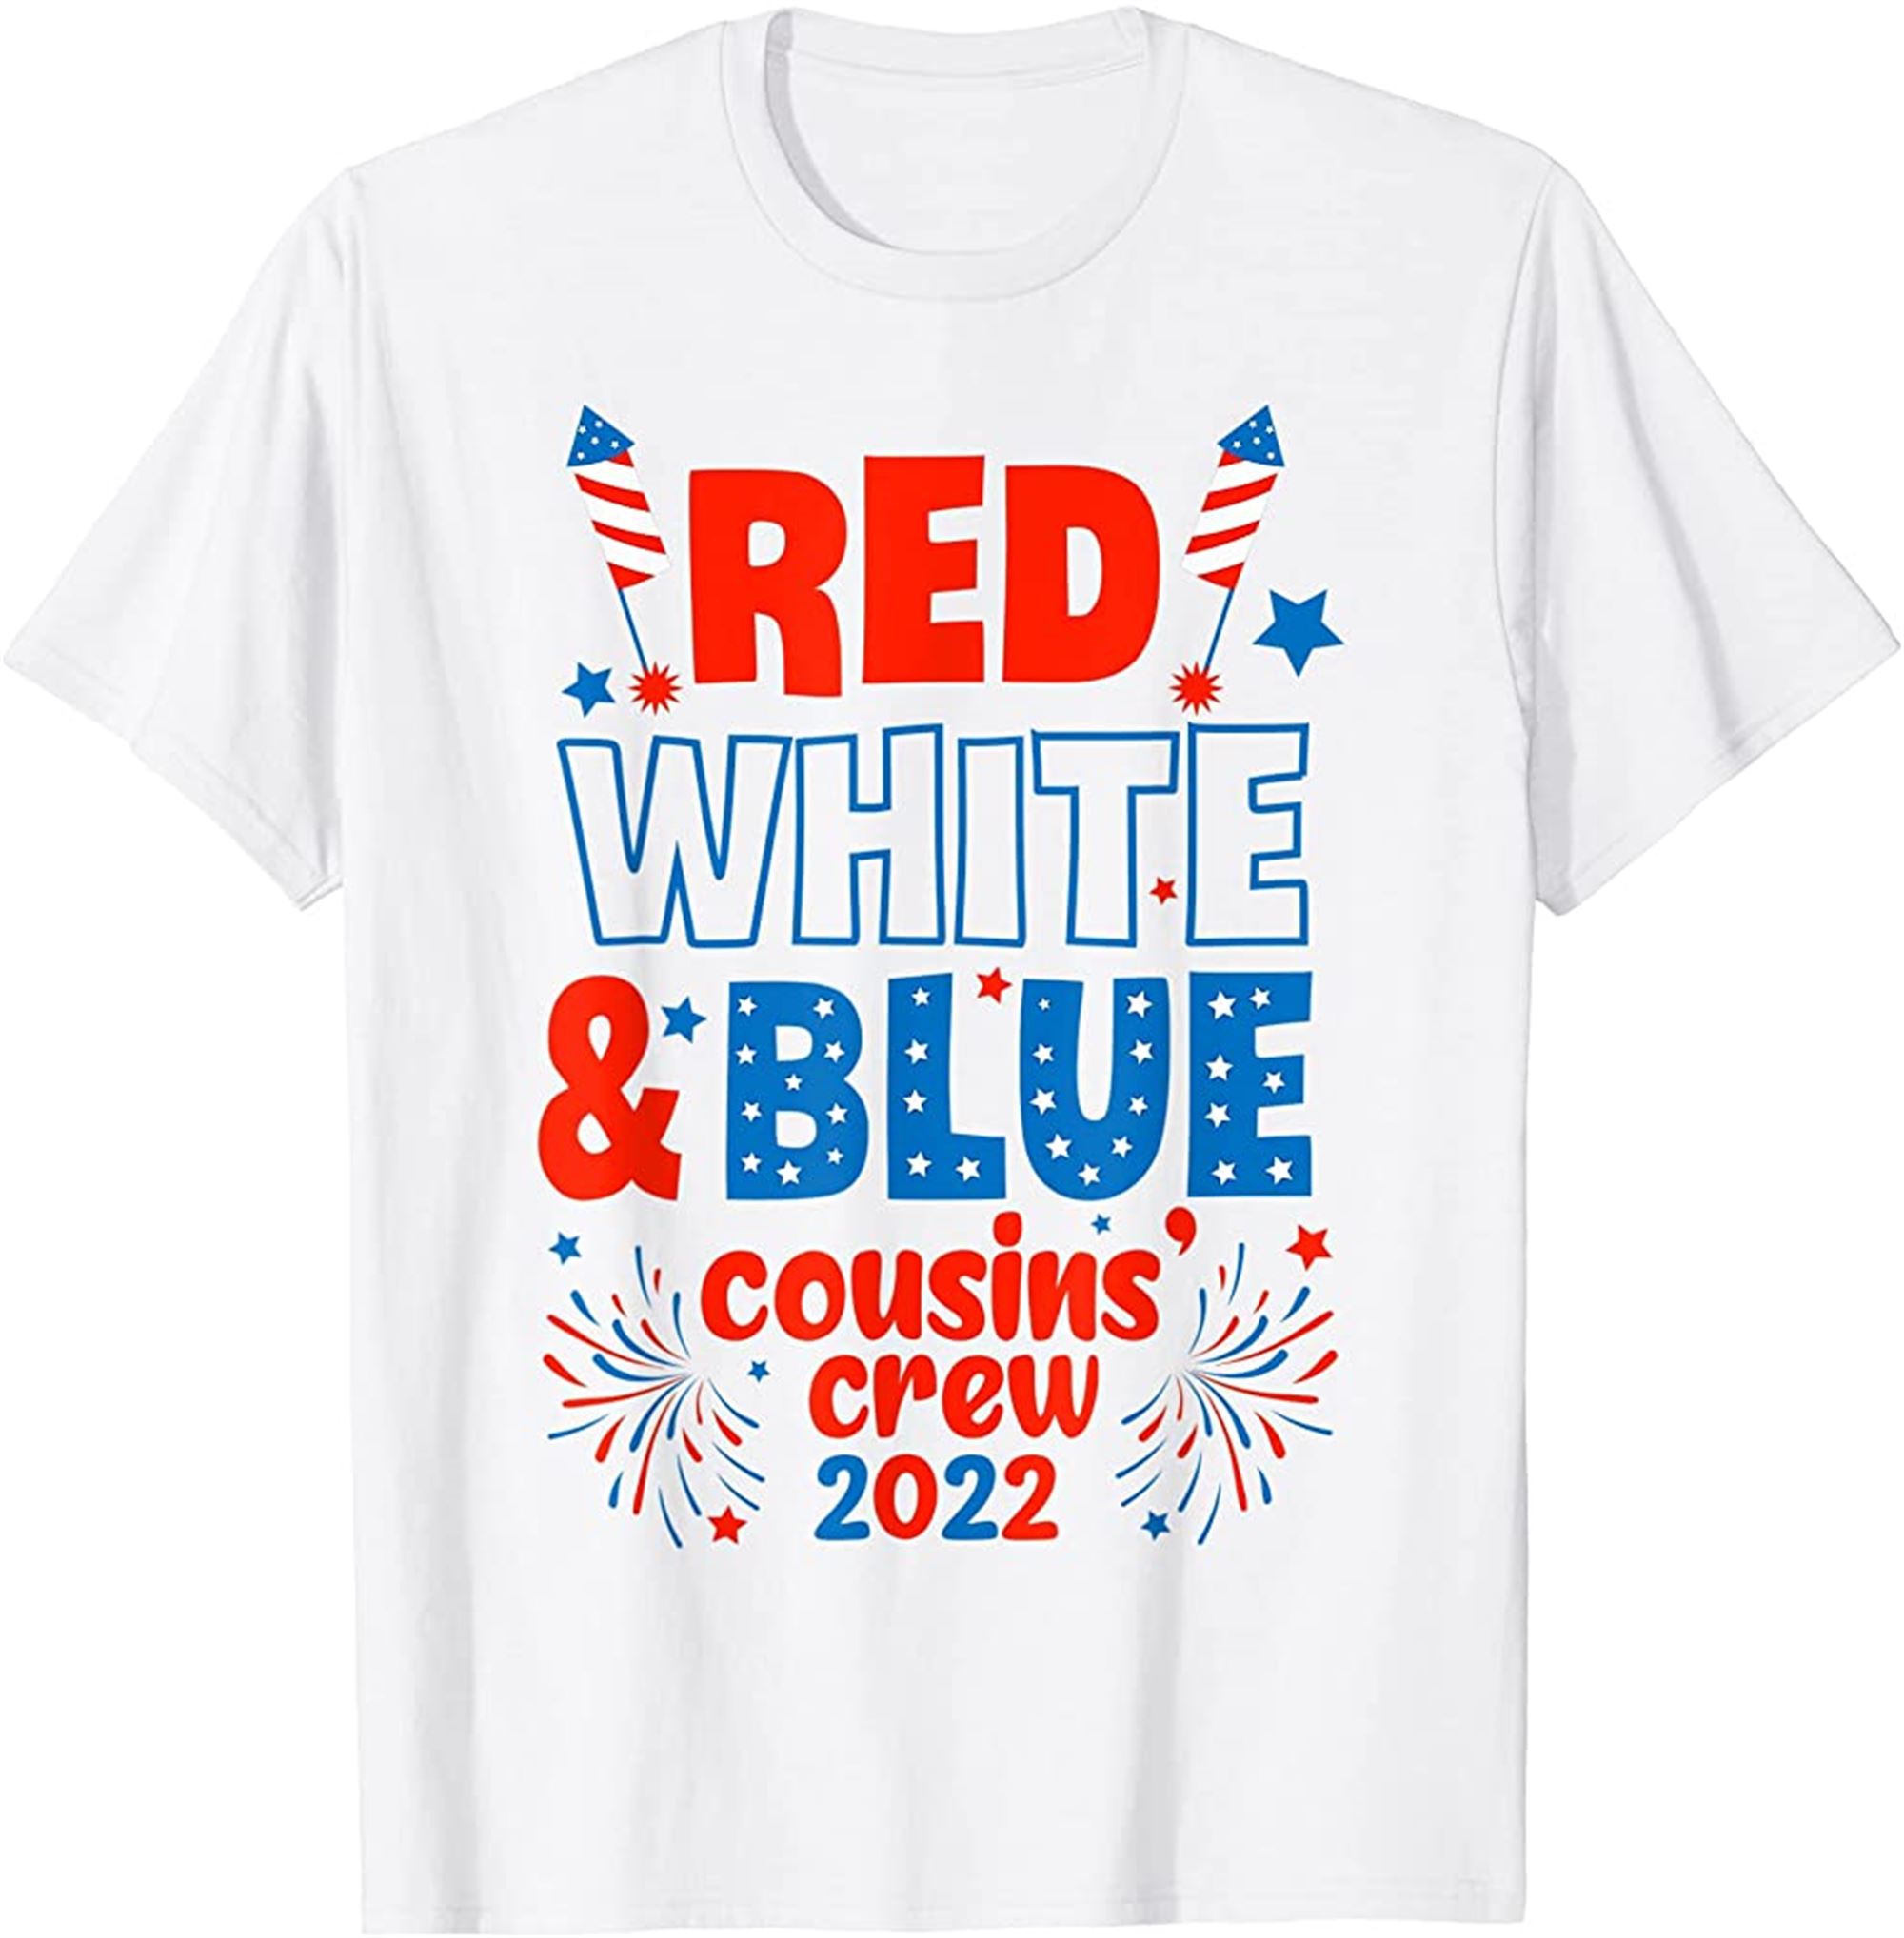 Red White Blue Cousin Crew 2022 Cousin Crew 4th Of July T-shirt Size Up To 5xl